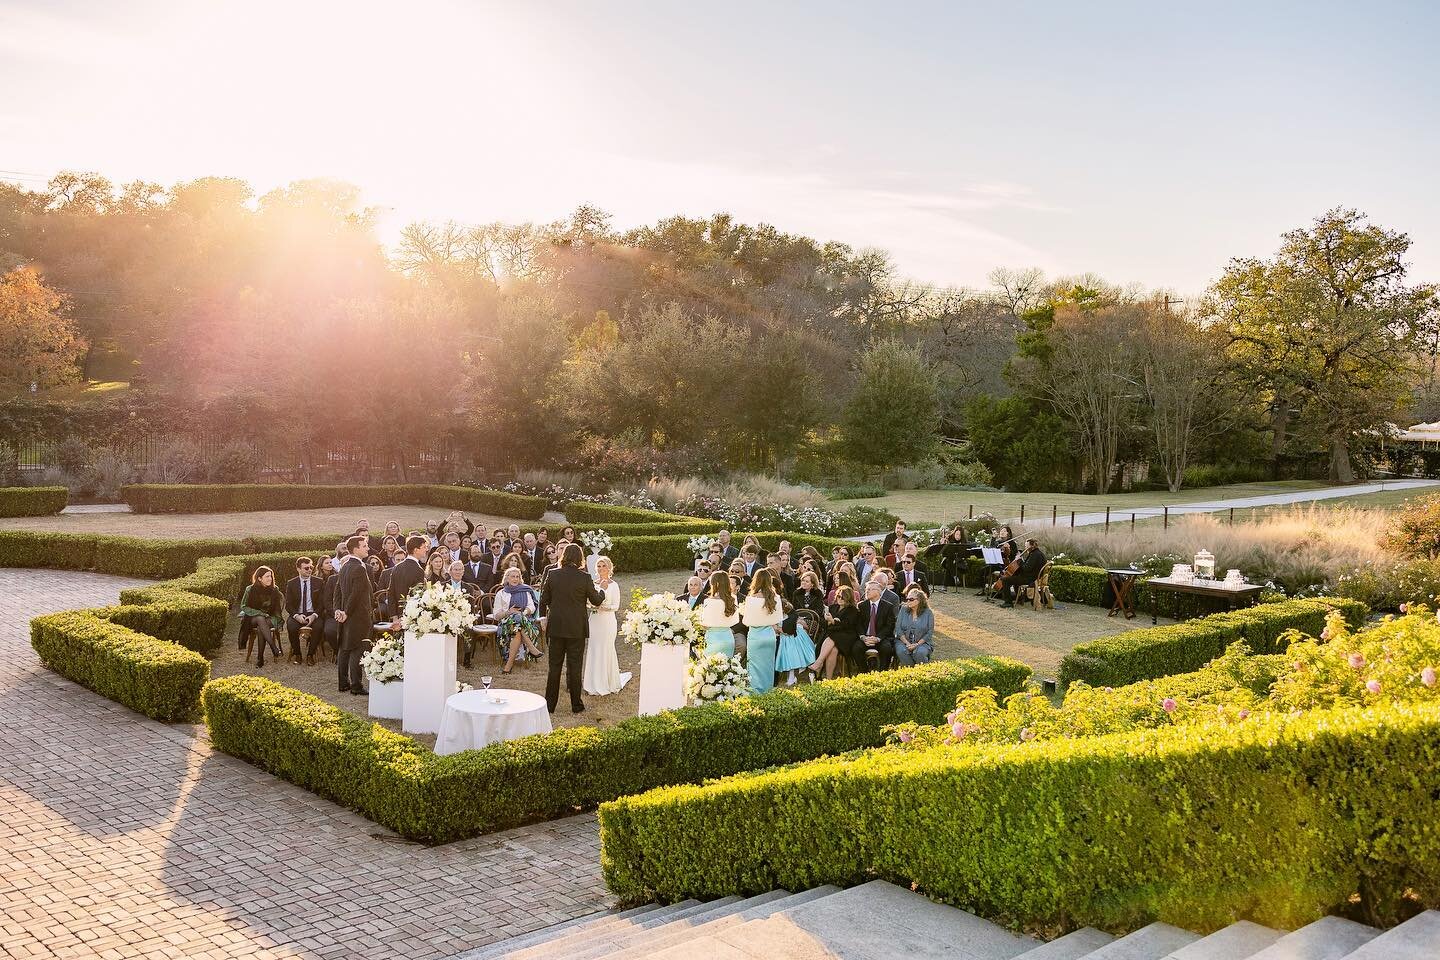 Sunset in the gardens at @commodoreperryauberge. 🤤#sneakpeek 

Planning and coordination: @36thstreetevents 
Ceremony and reception: @commodoreperryauberge 
Floral: @nativebloomfloral 
MUAH: @missionstylehouse 
Music: DJ Jesse J
String quartet: @ter